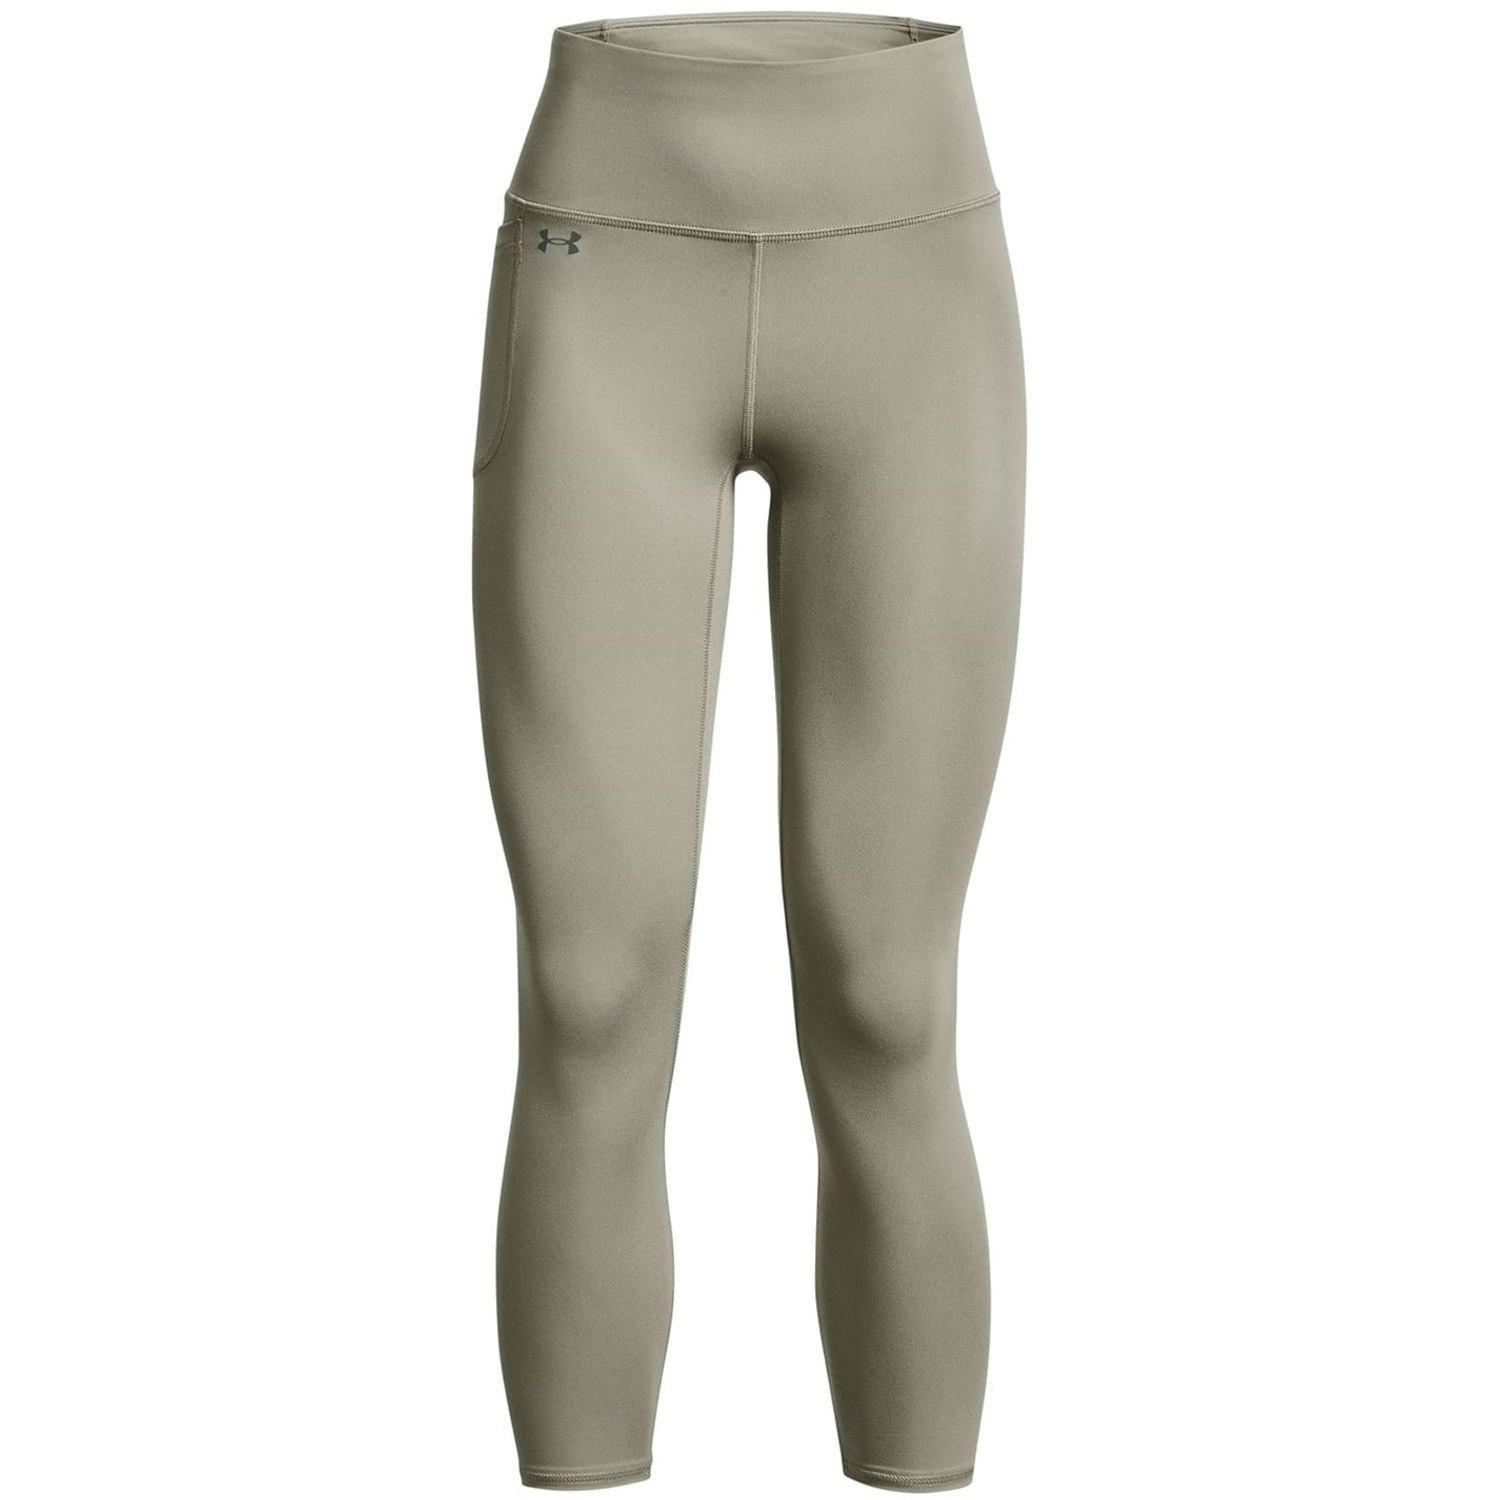 Under Armour Women's Motion Ankle Leggings -Rivalry -XLarge- New